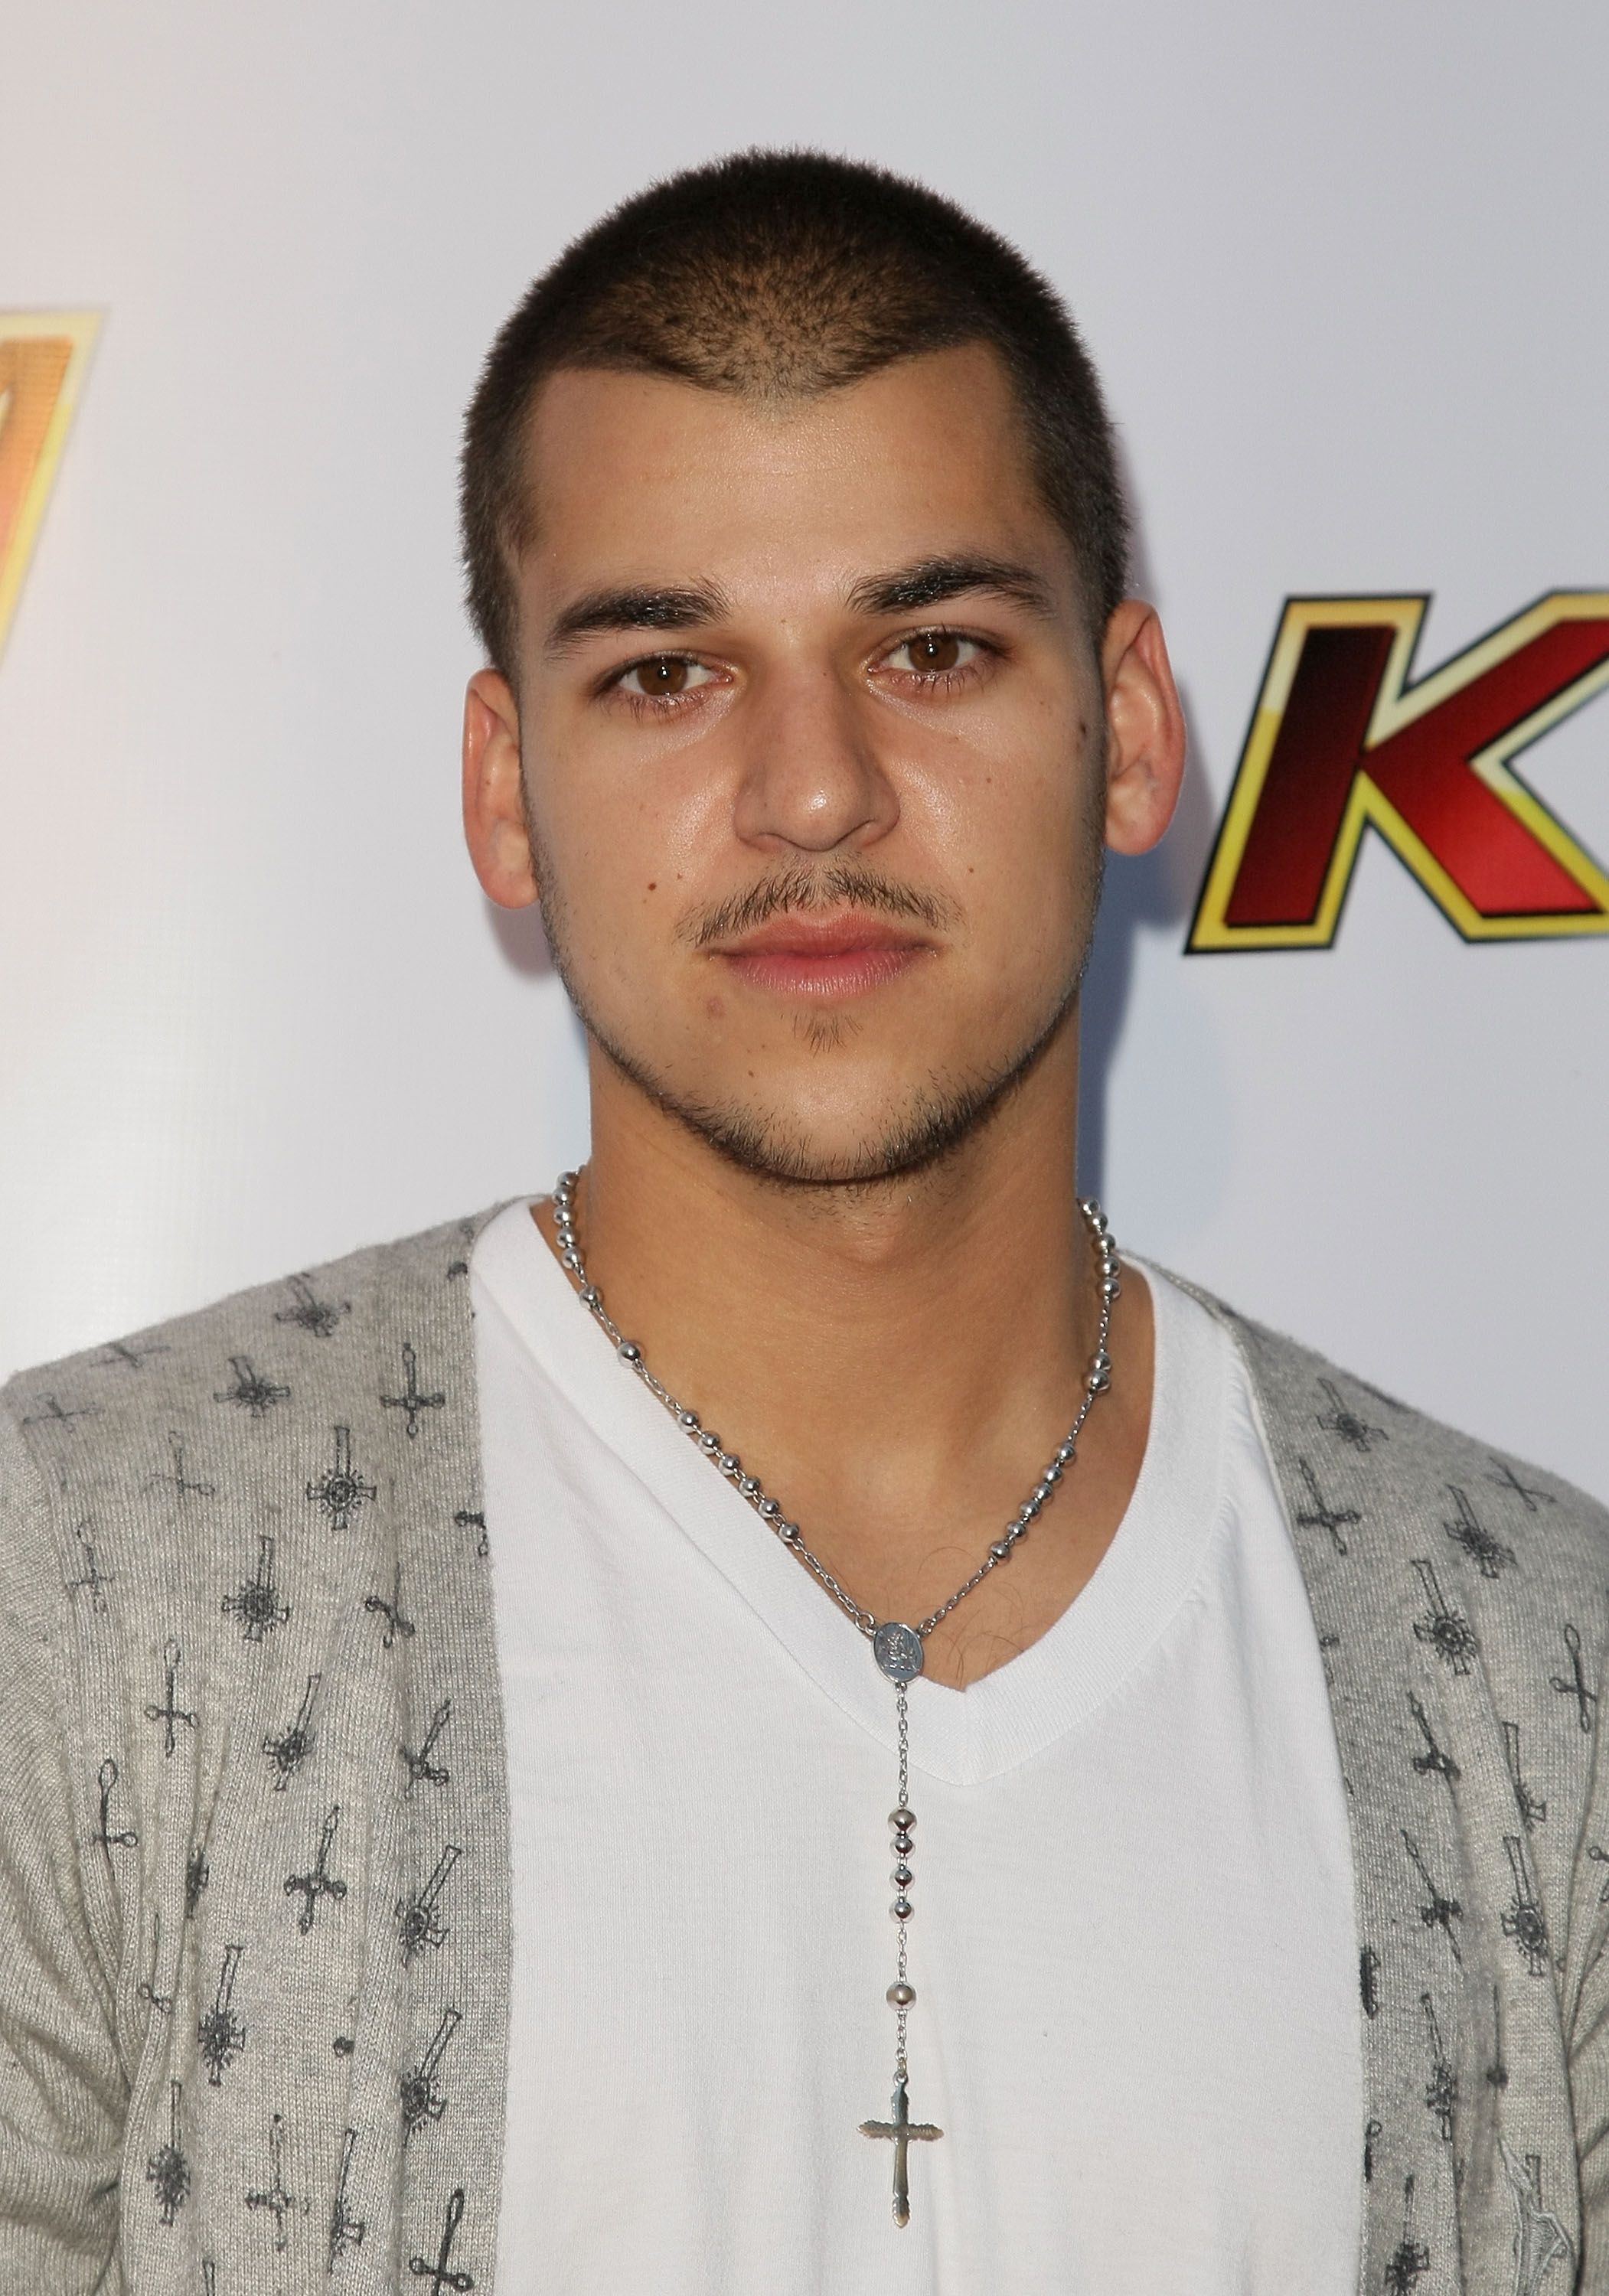 Robert Kardashian during the KIIS-FM's 2008 Wango Tango concert held at the Verizon Wireless Amphitheater on May 10, 2008 in Irvine, California. | Source: Getty Images